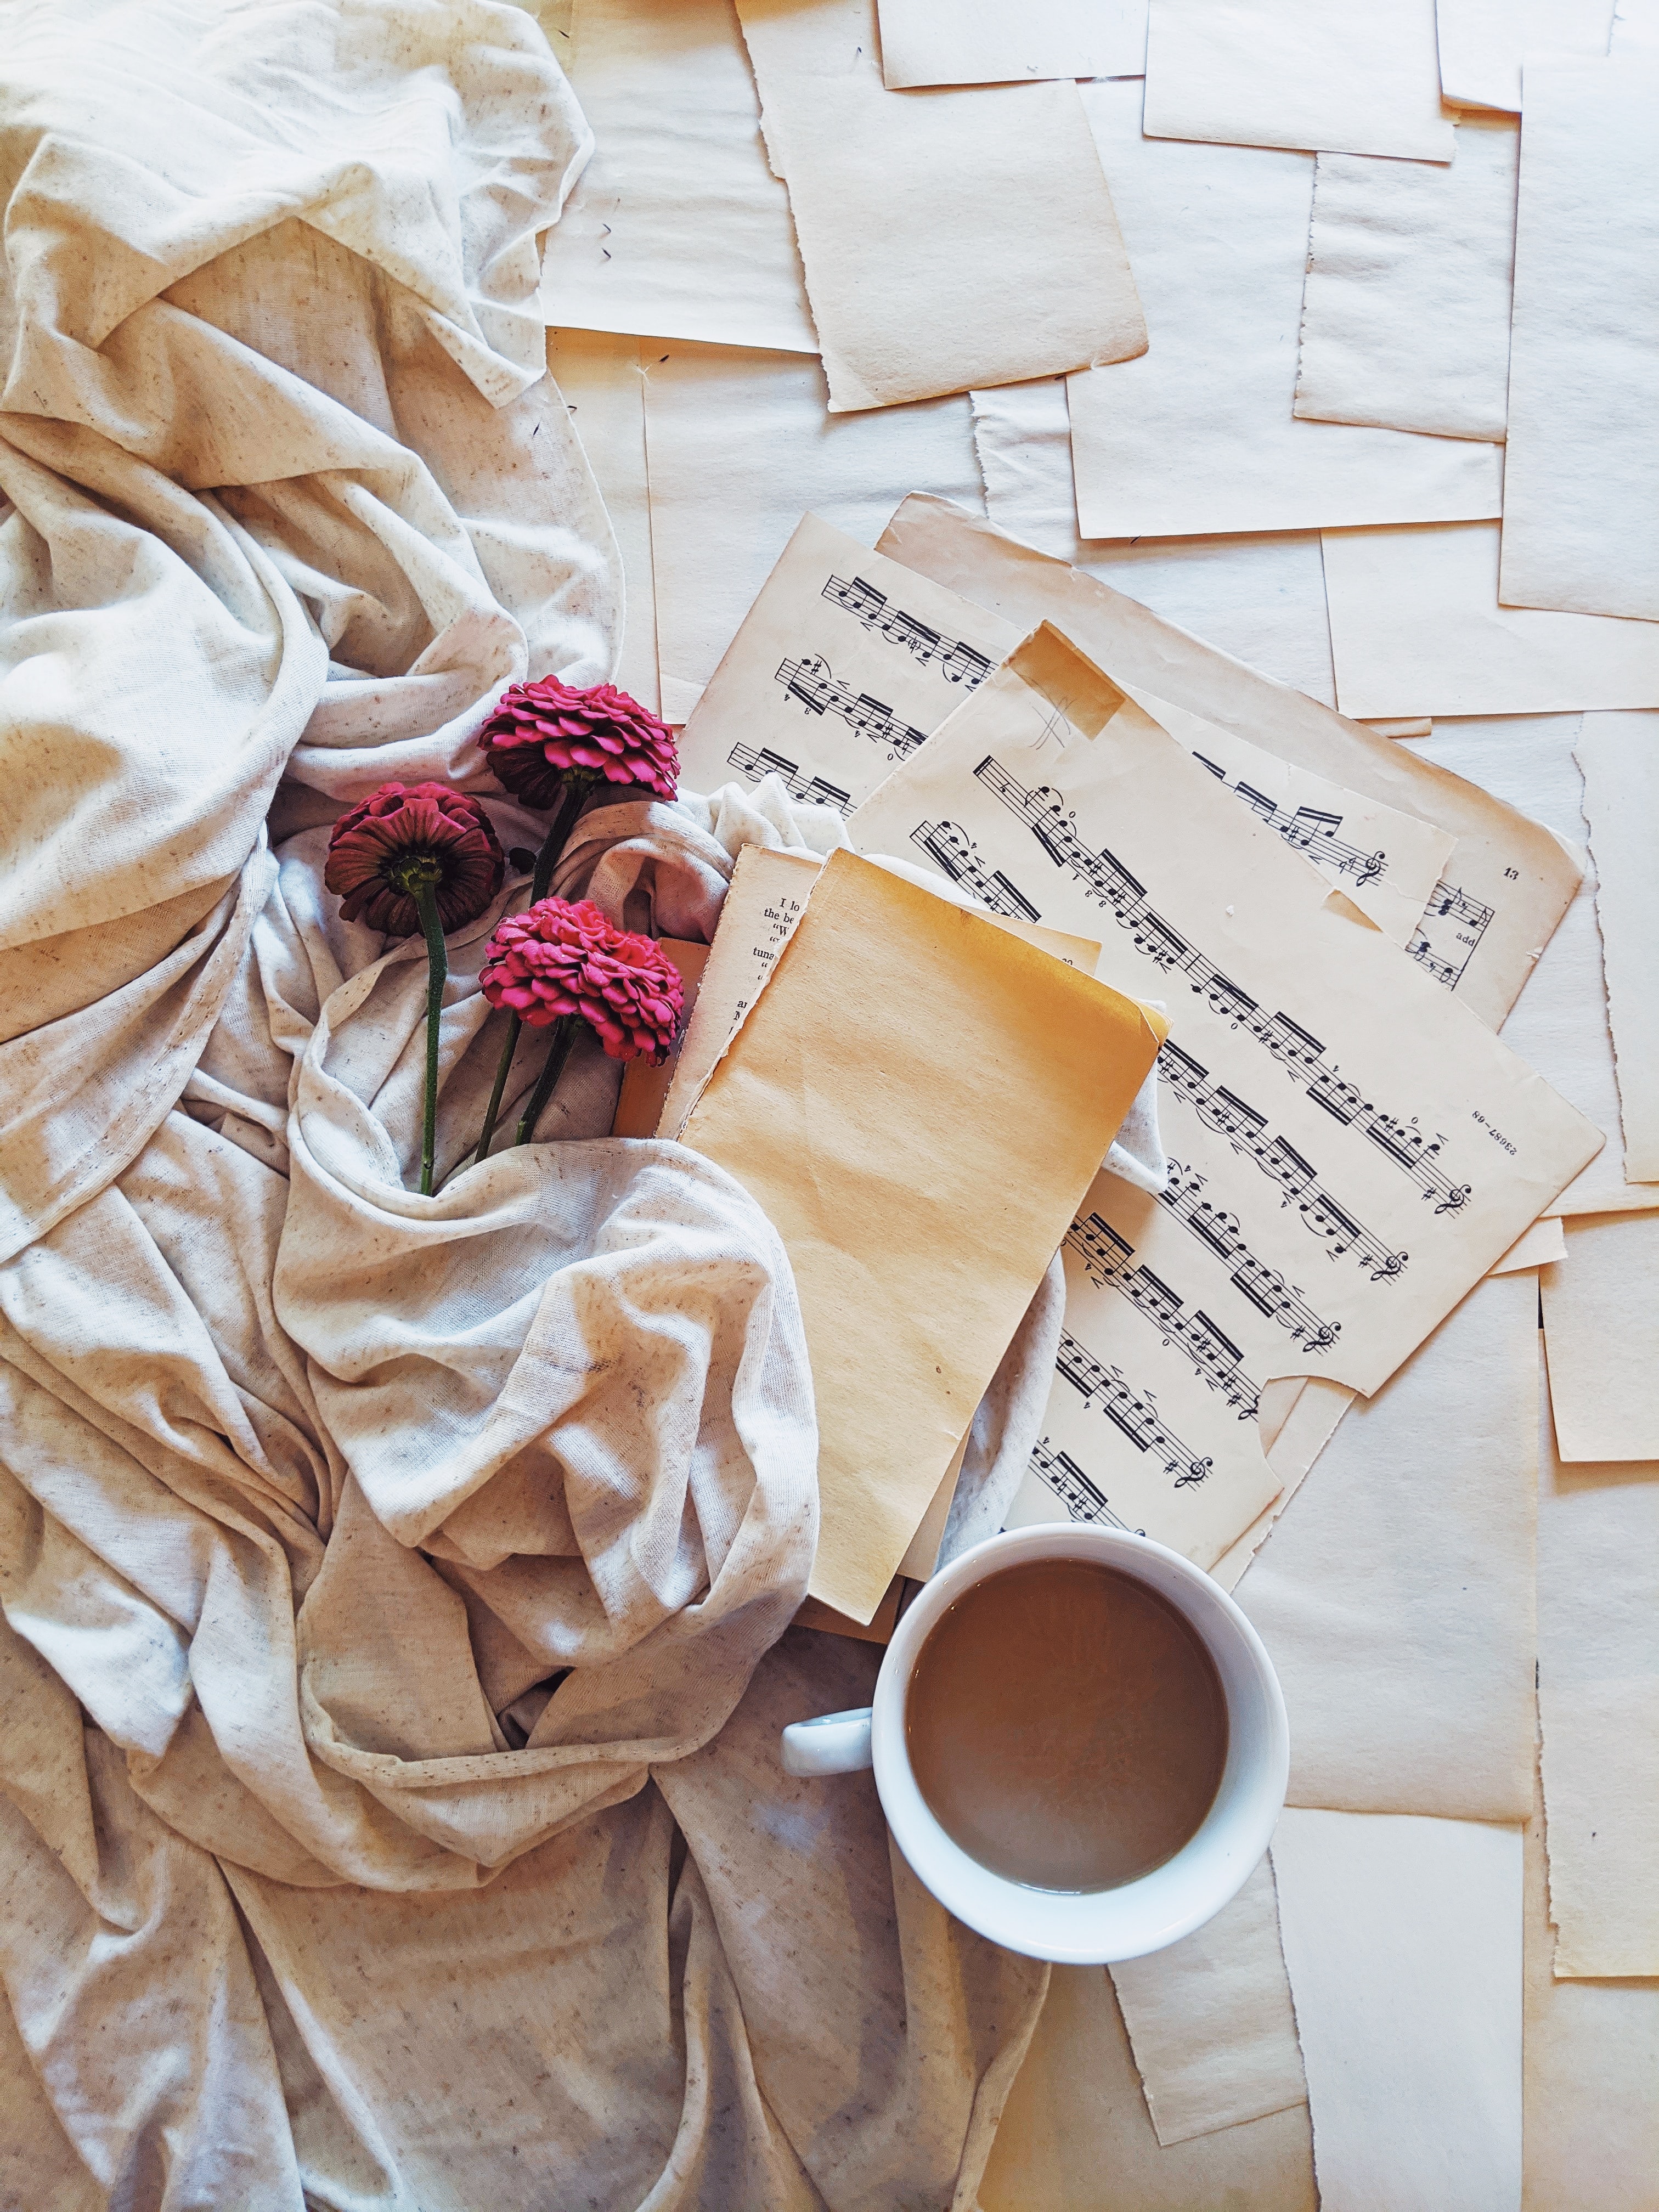 music, flowers, miscellanea, miscellaneous, cup, cloth, notes Full HD